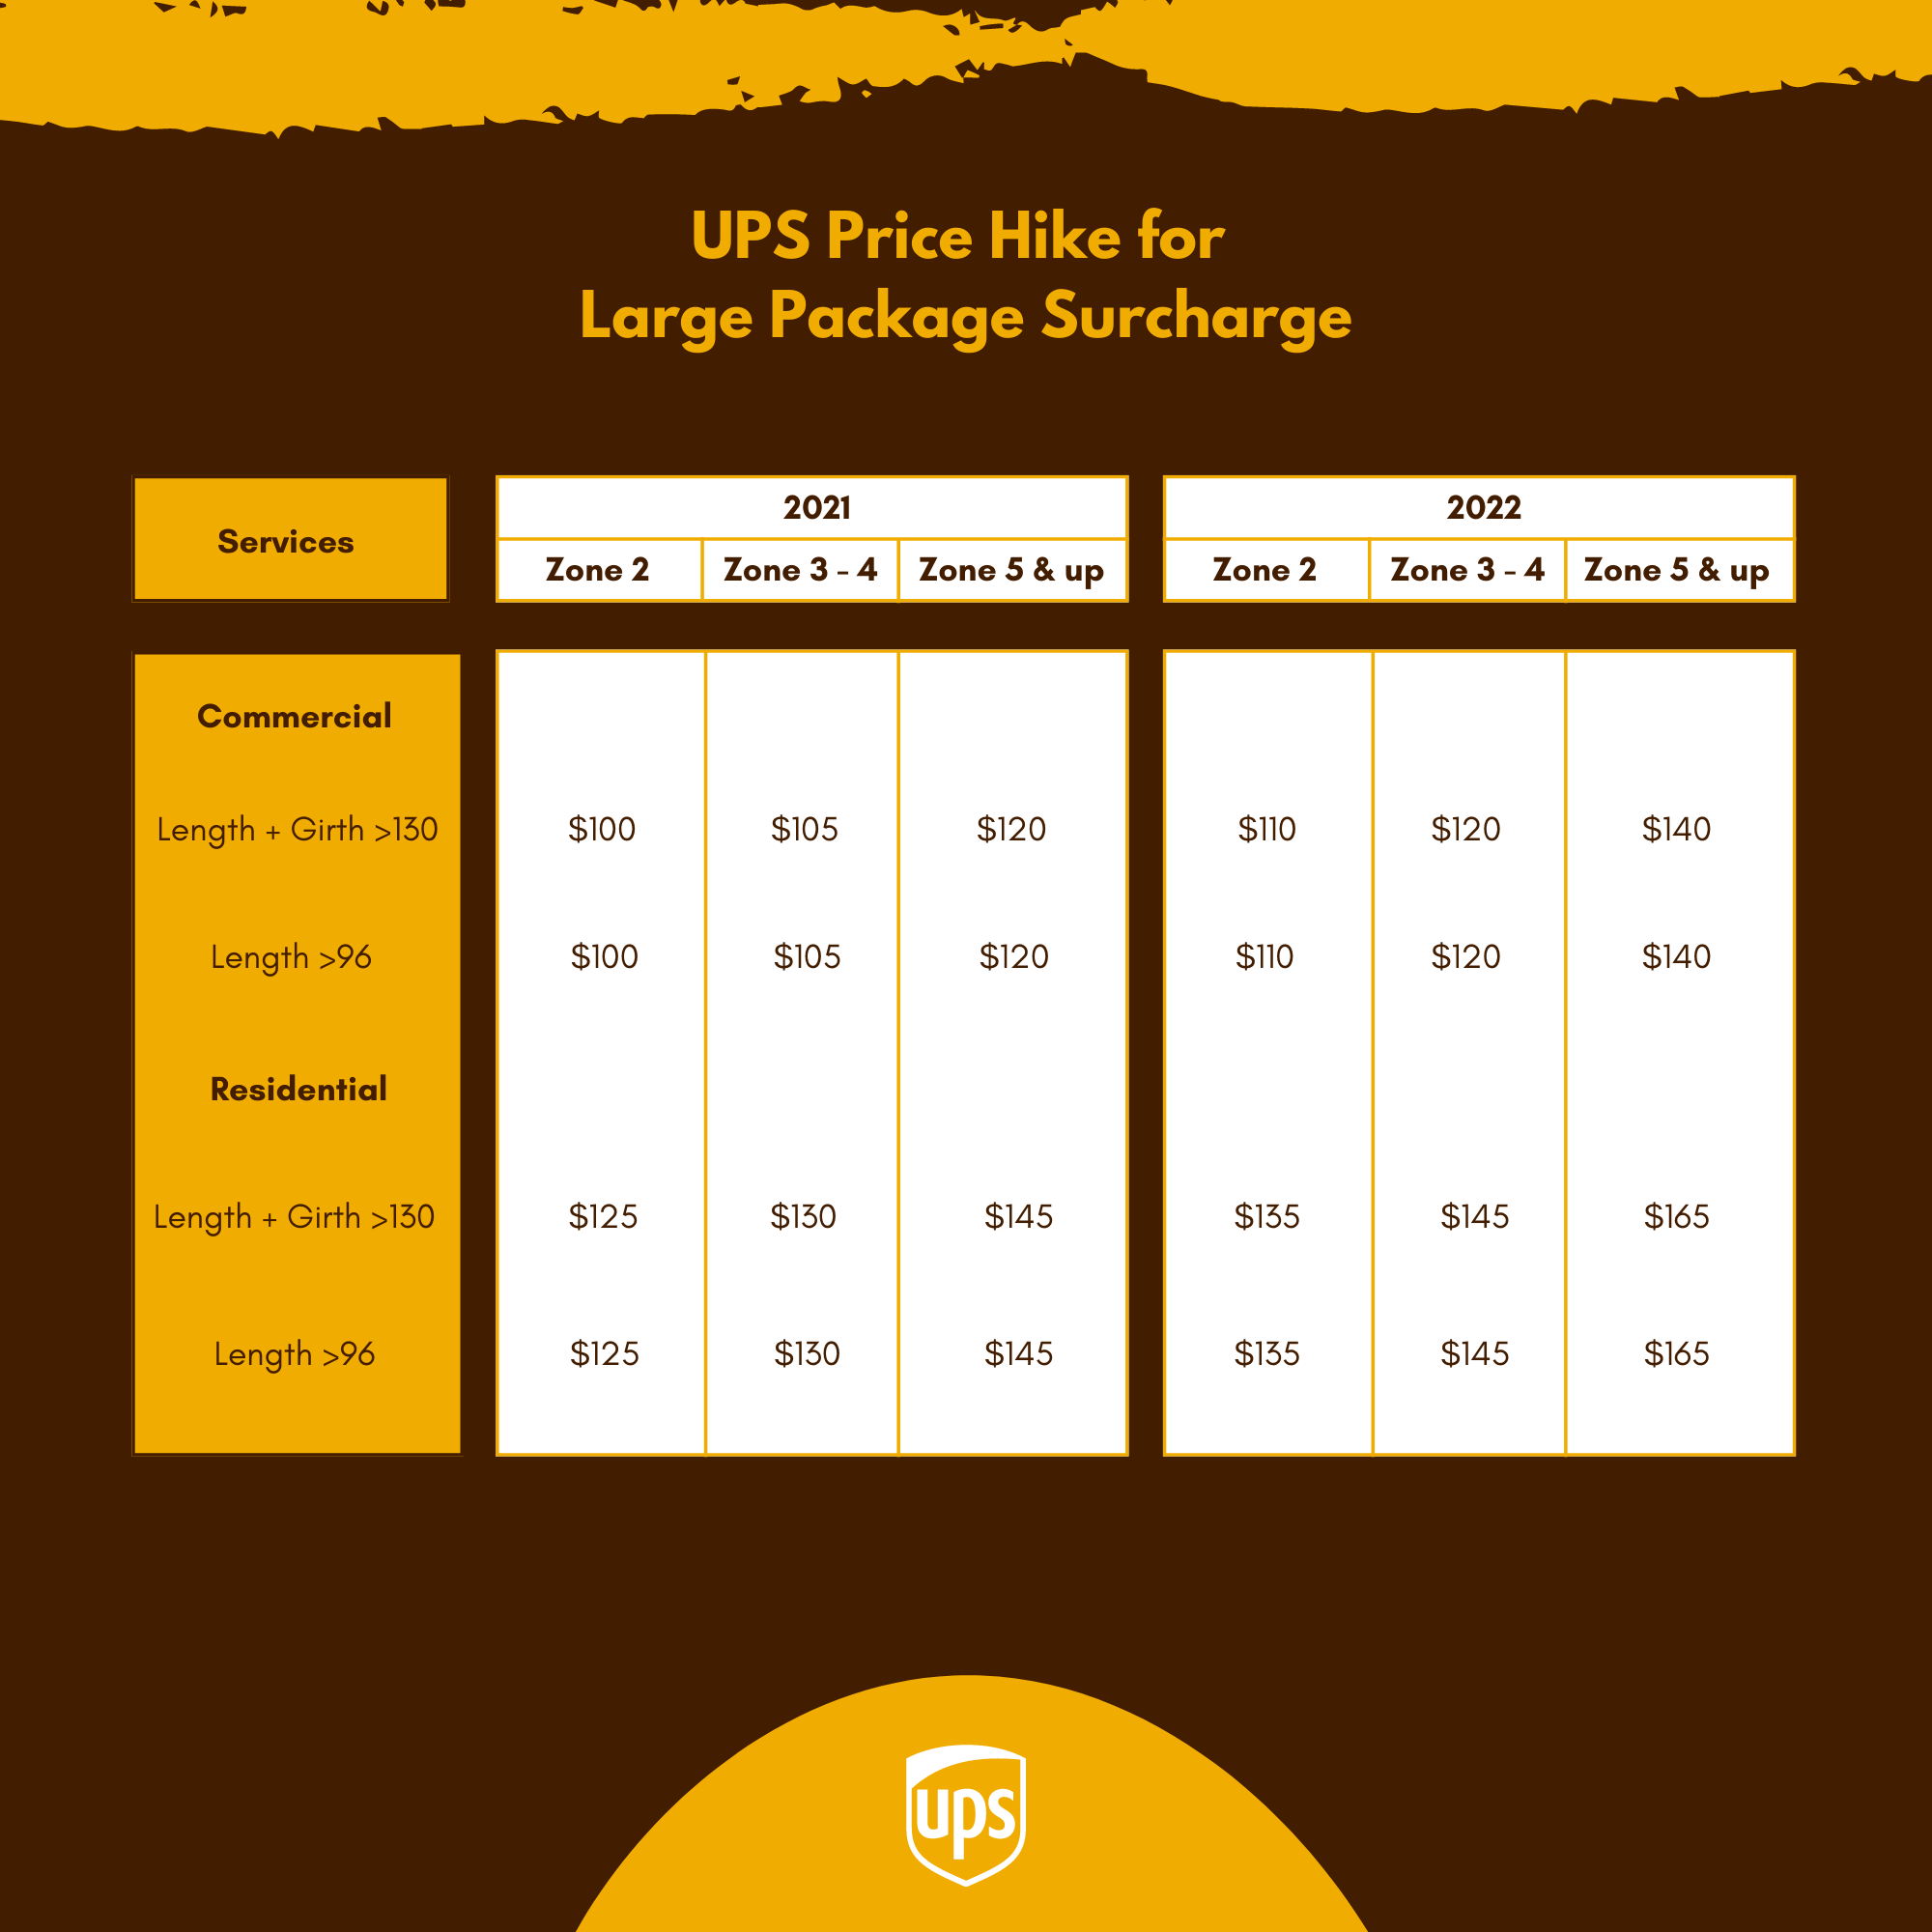 UPS large package surcharge in 2022